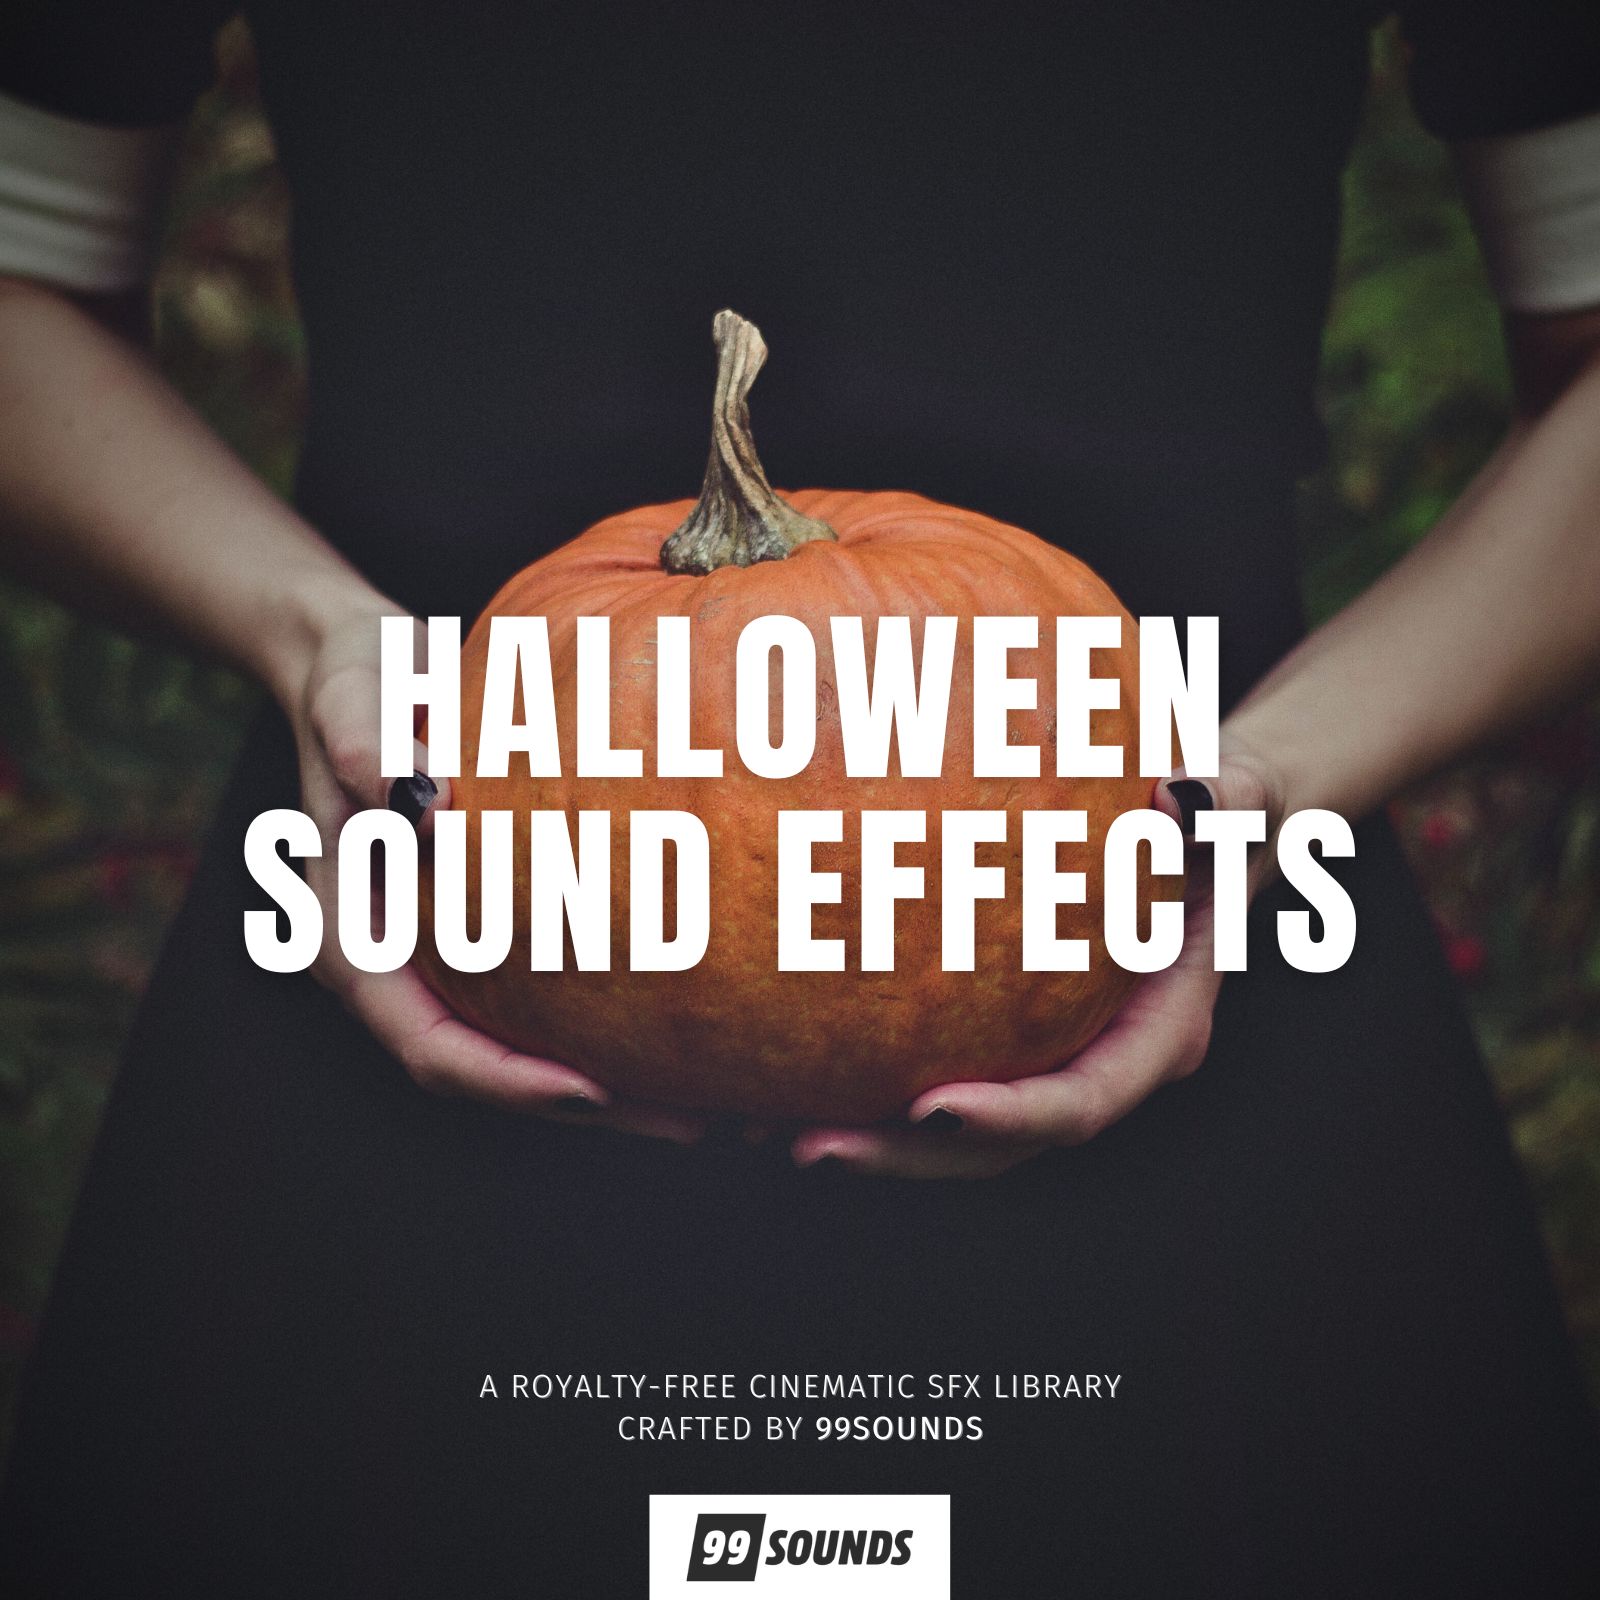 Free Sound Effects for All Occasions: 40+ Download Sites - Hongkiat